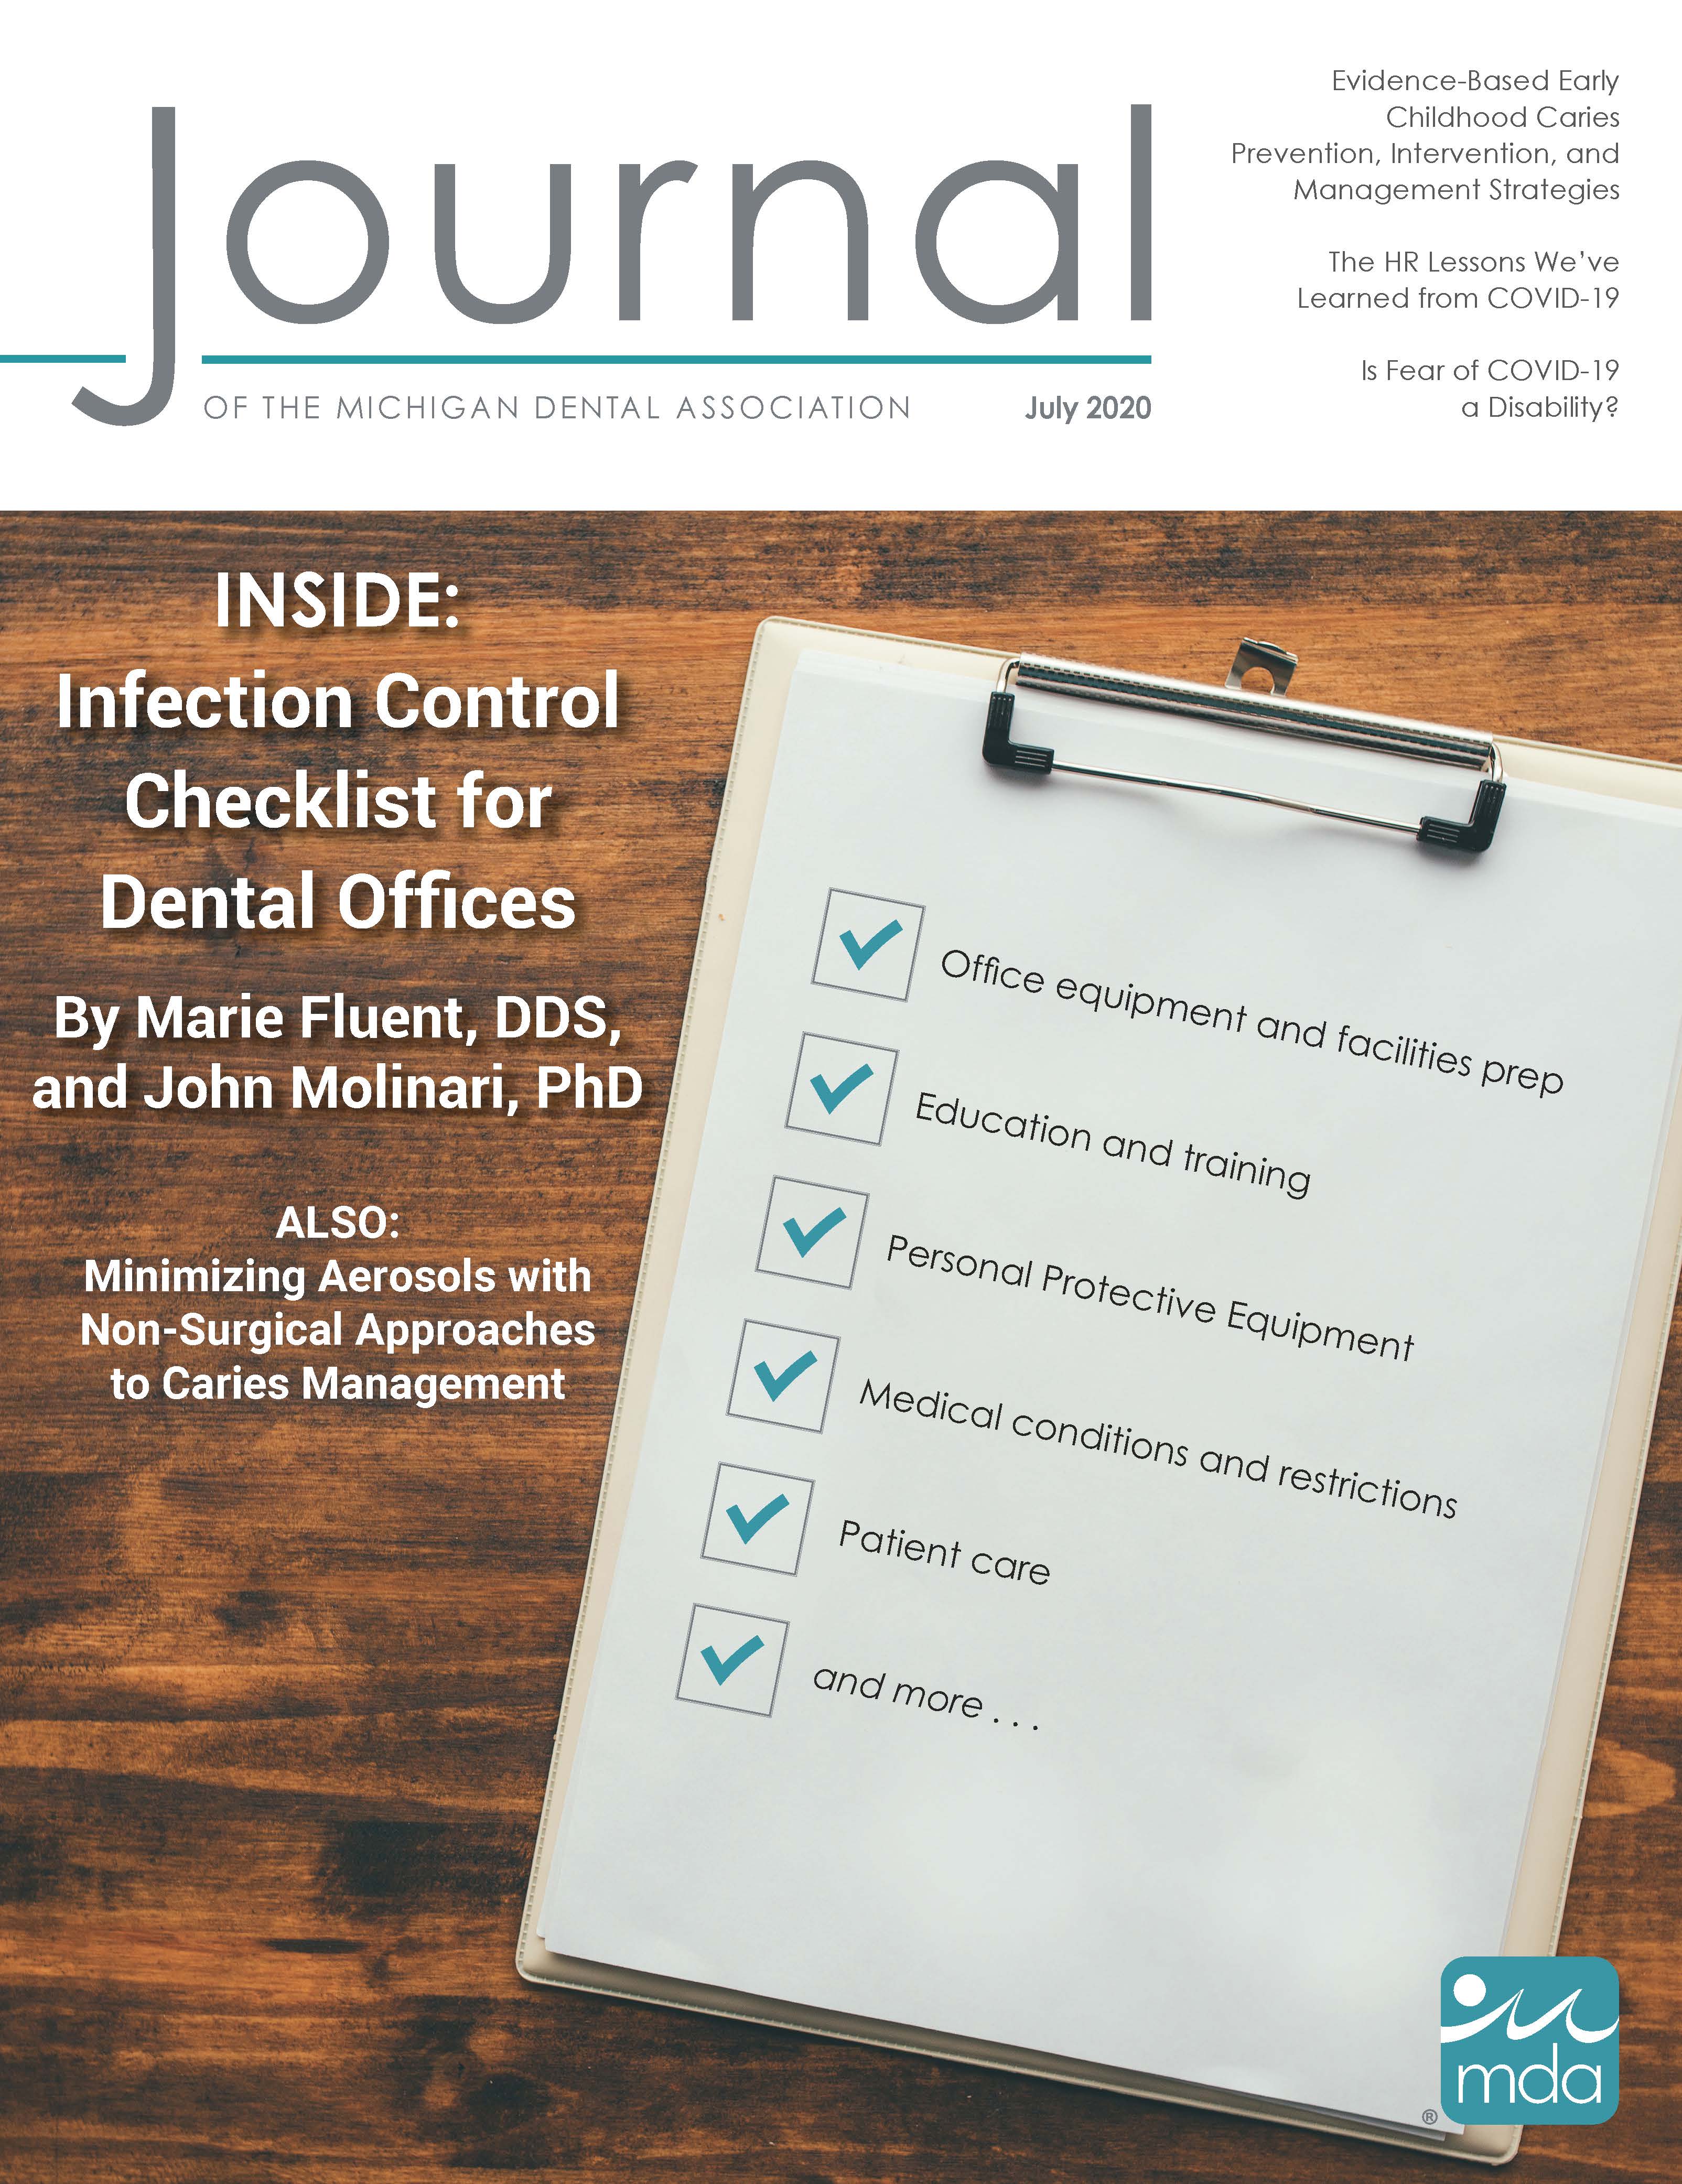 Cover of the Journal of the Michigan Dental Association with a clipboard and checklist.